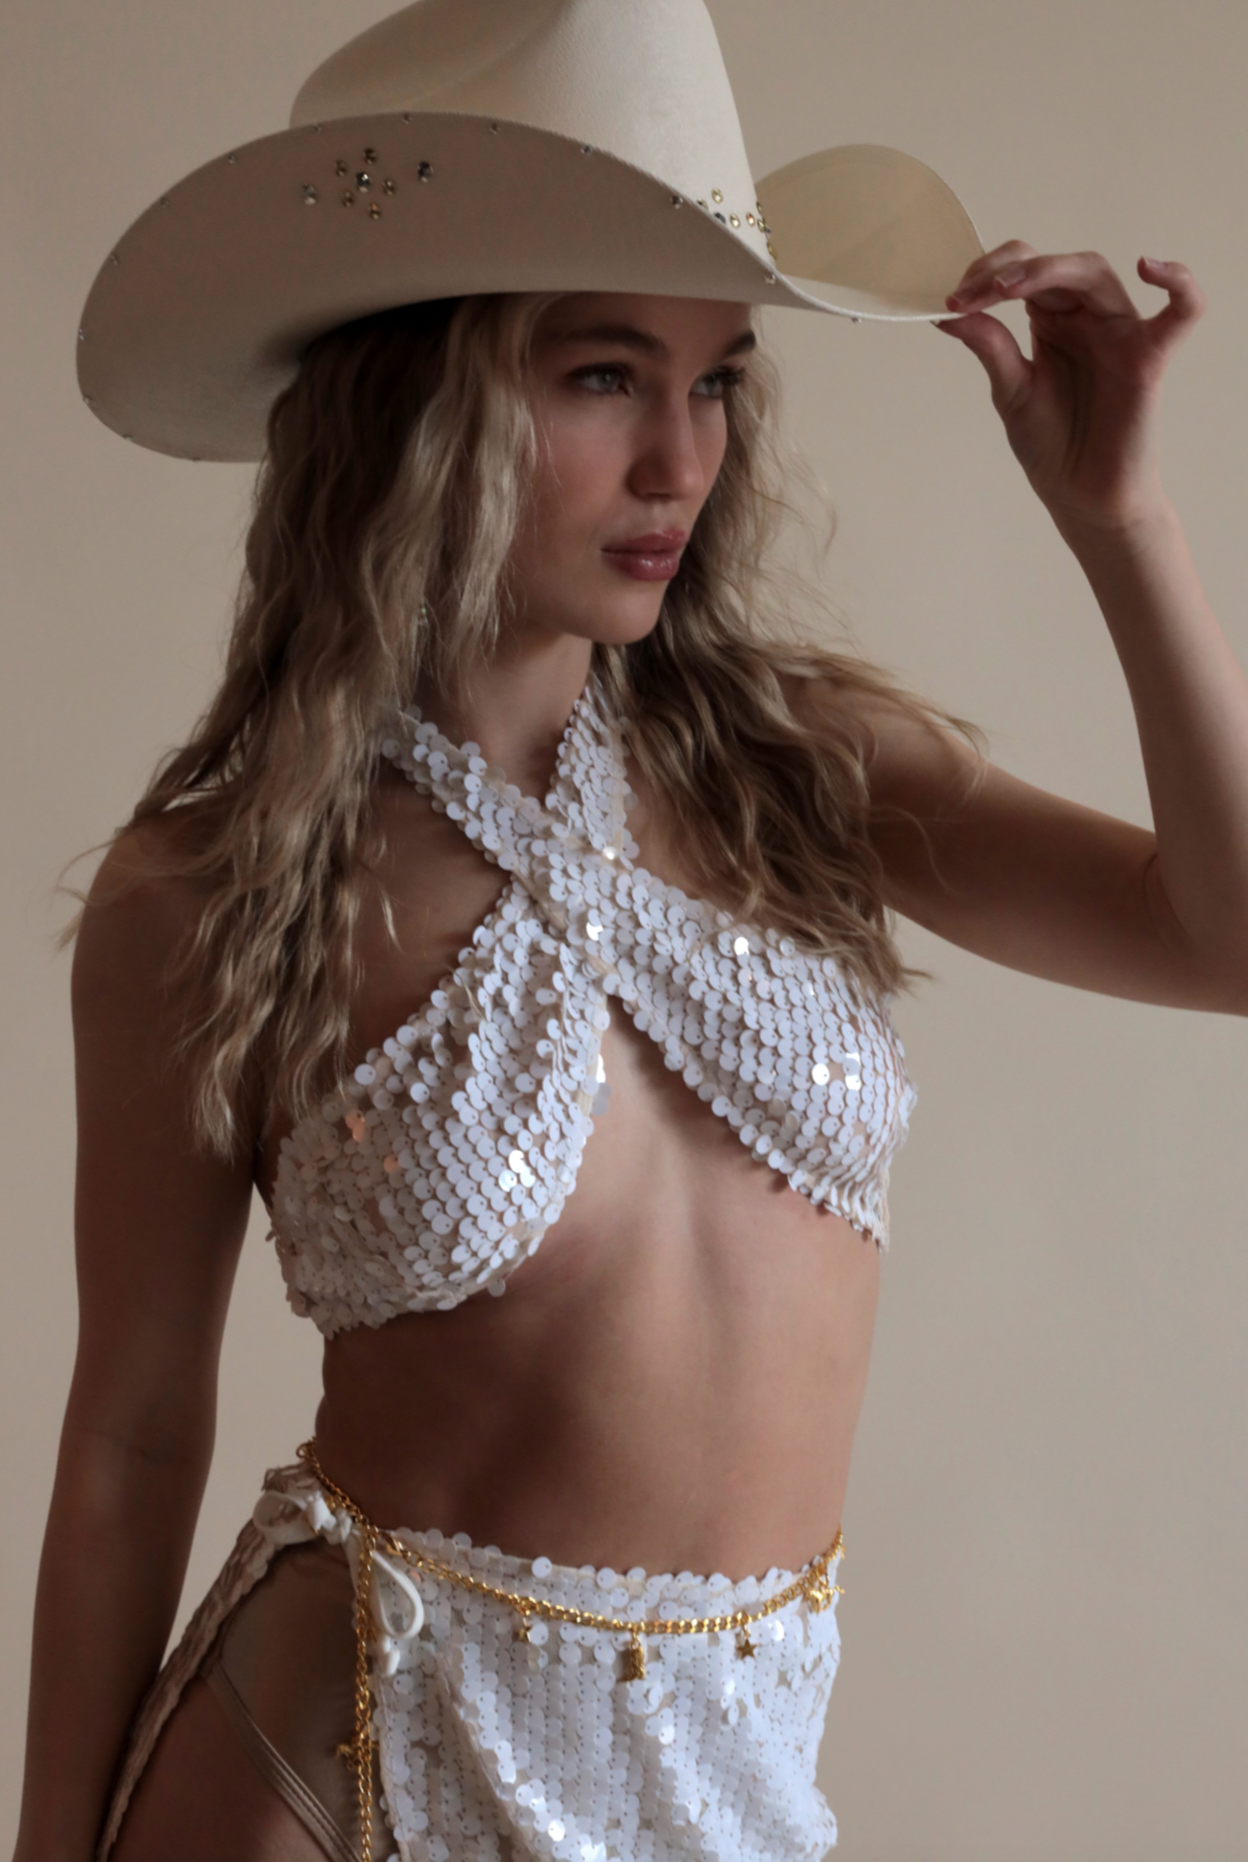 White Criss Cross Top in Mermaid Sequin with matching tie skirt and cowboy hat.